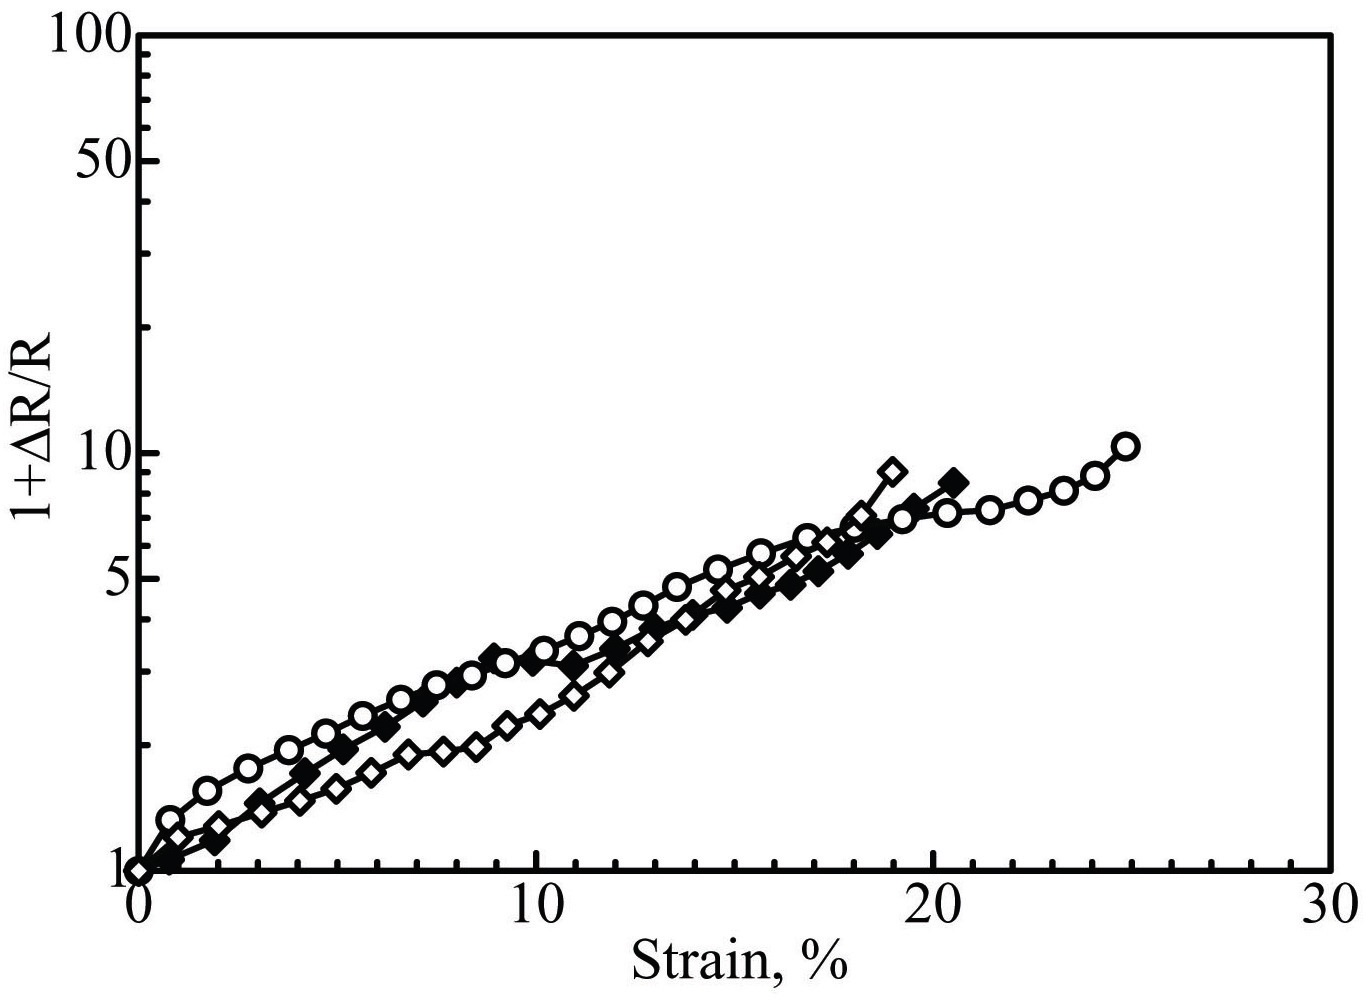 Experimental results of electrical resistance change under tensile strain (for type A).